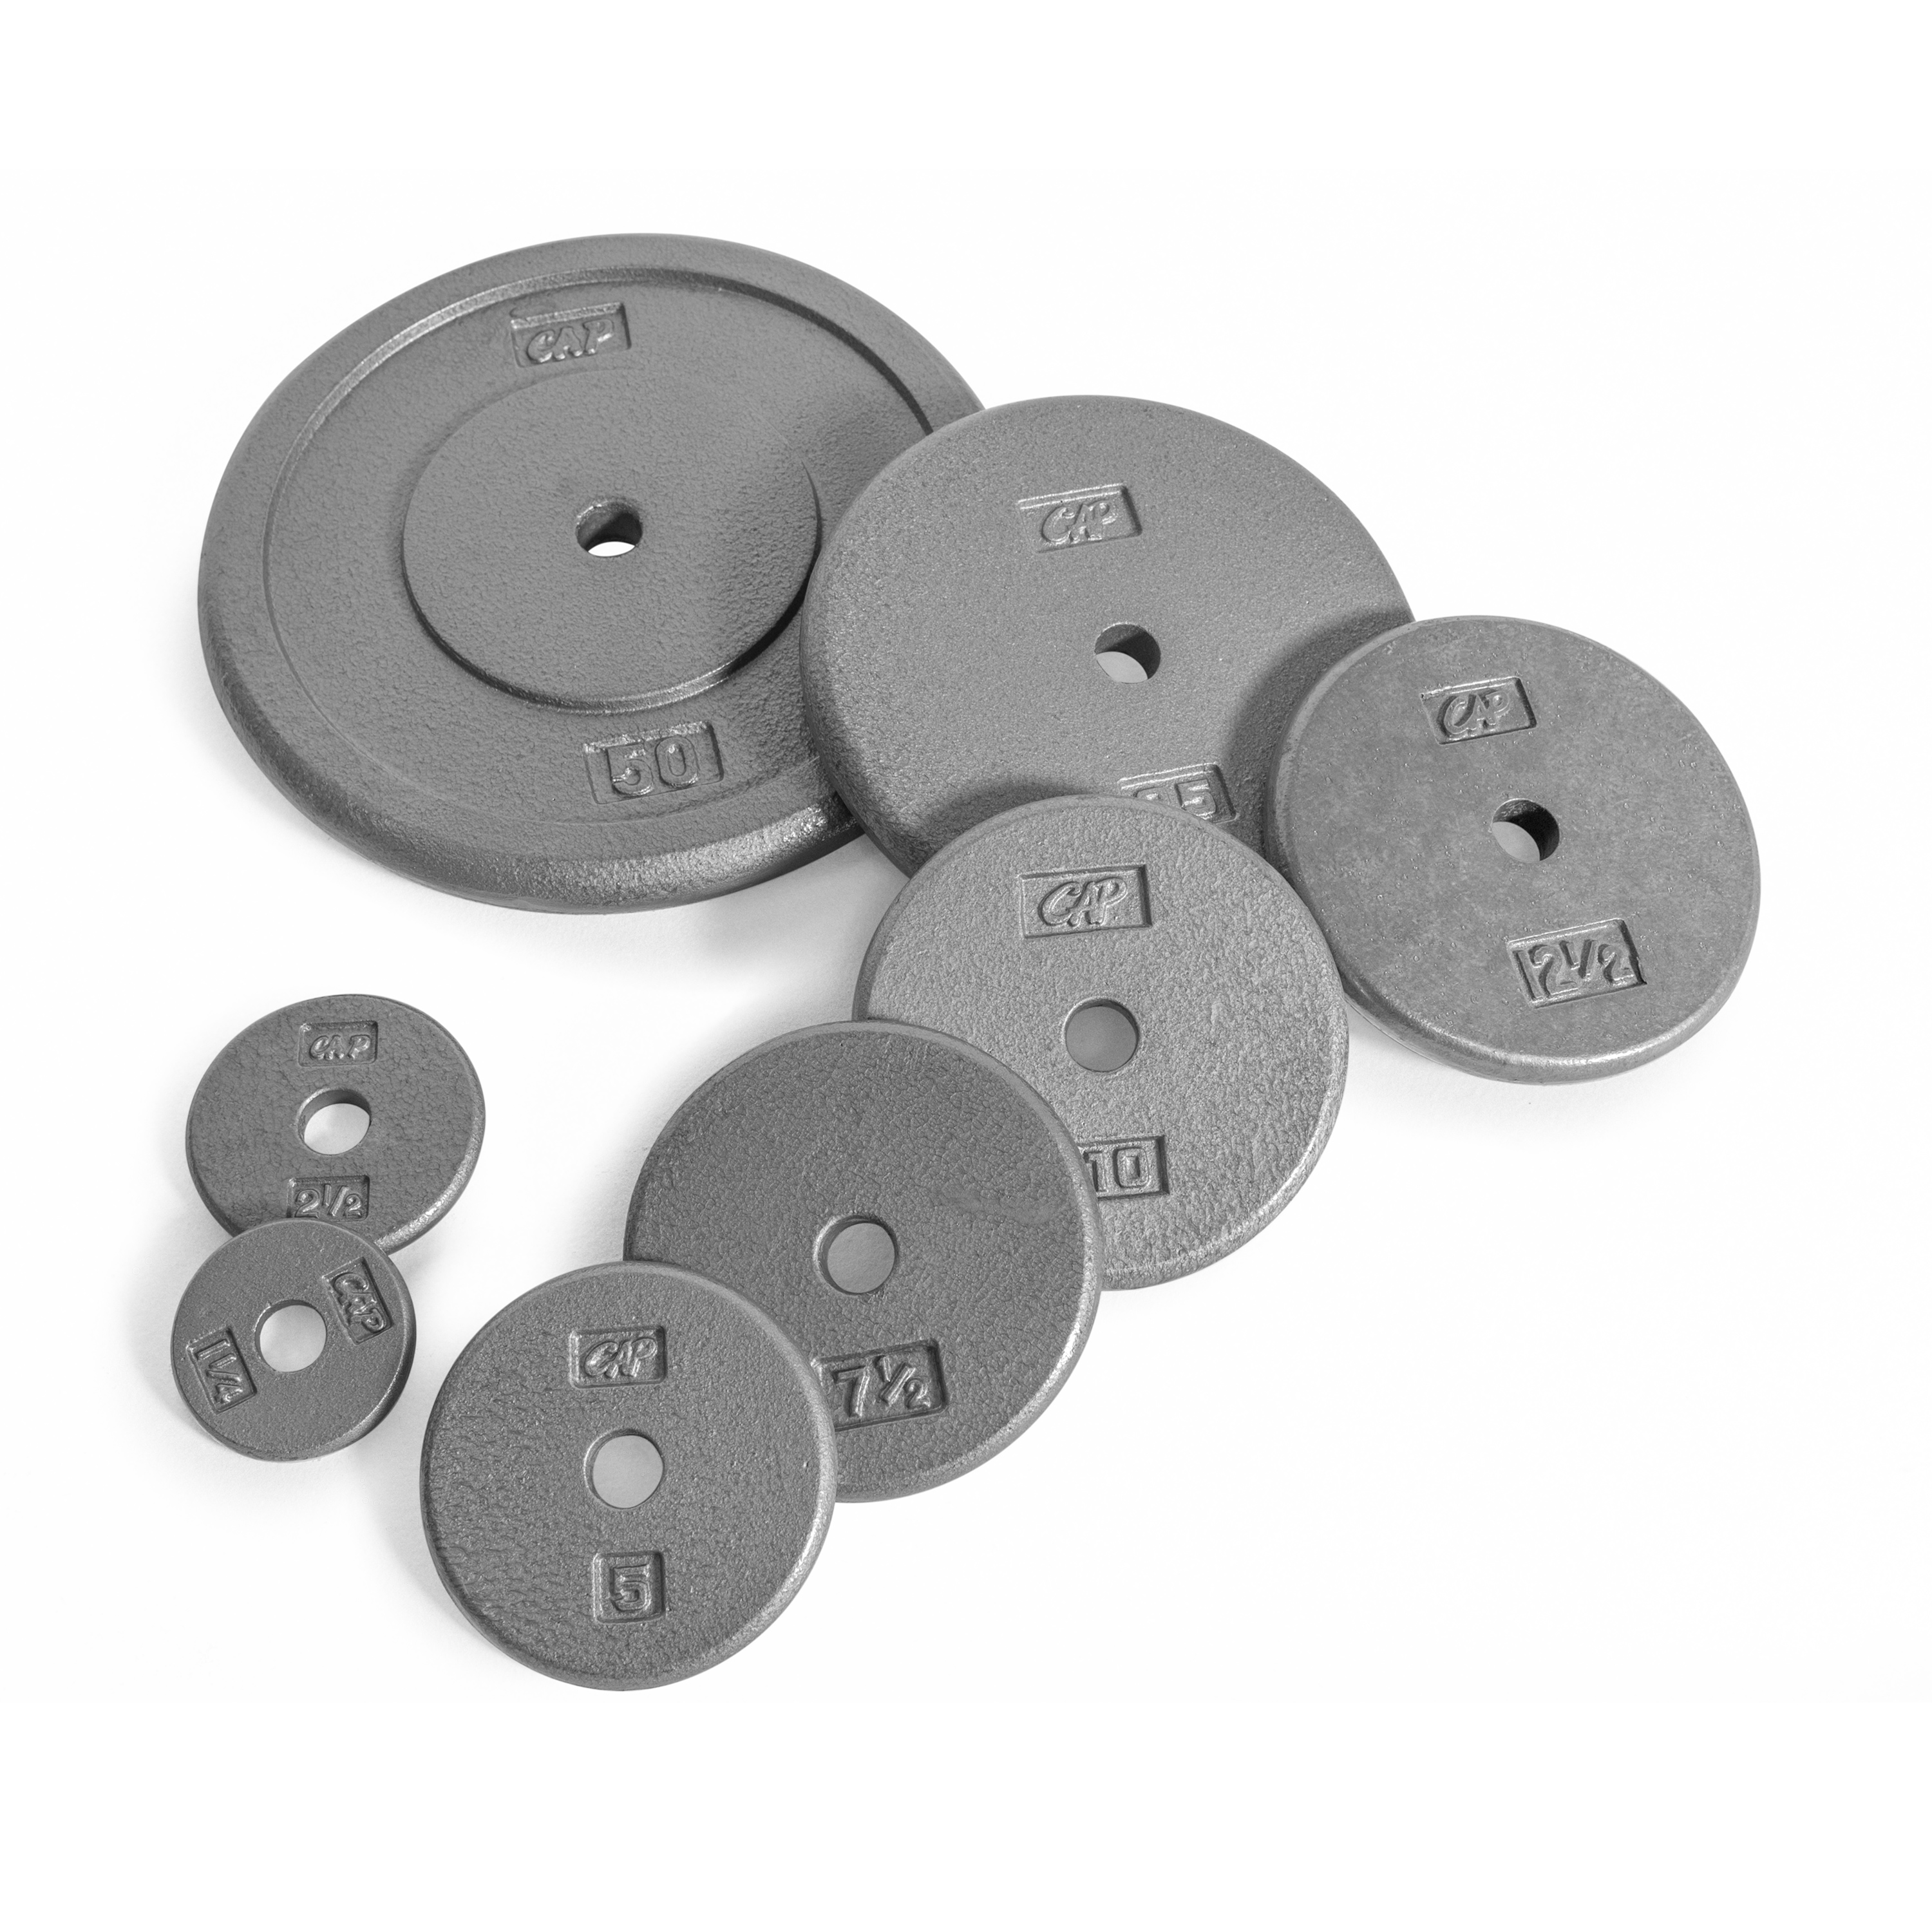 CAP Barbell Standard Grip Weight Plate 25lbs for sale online Gray